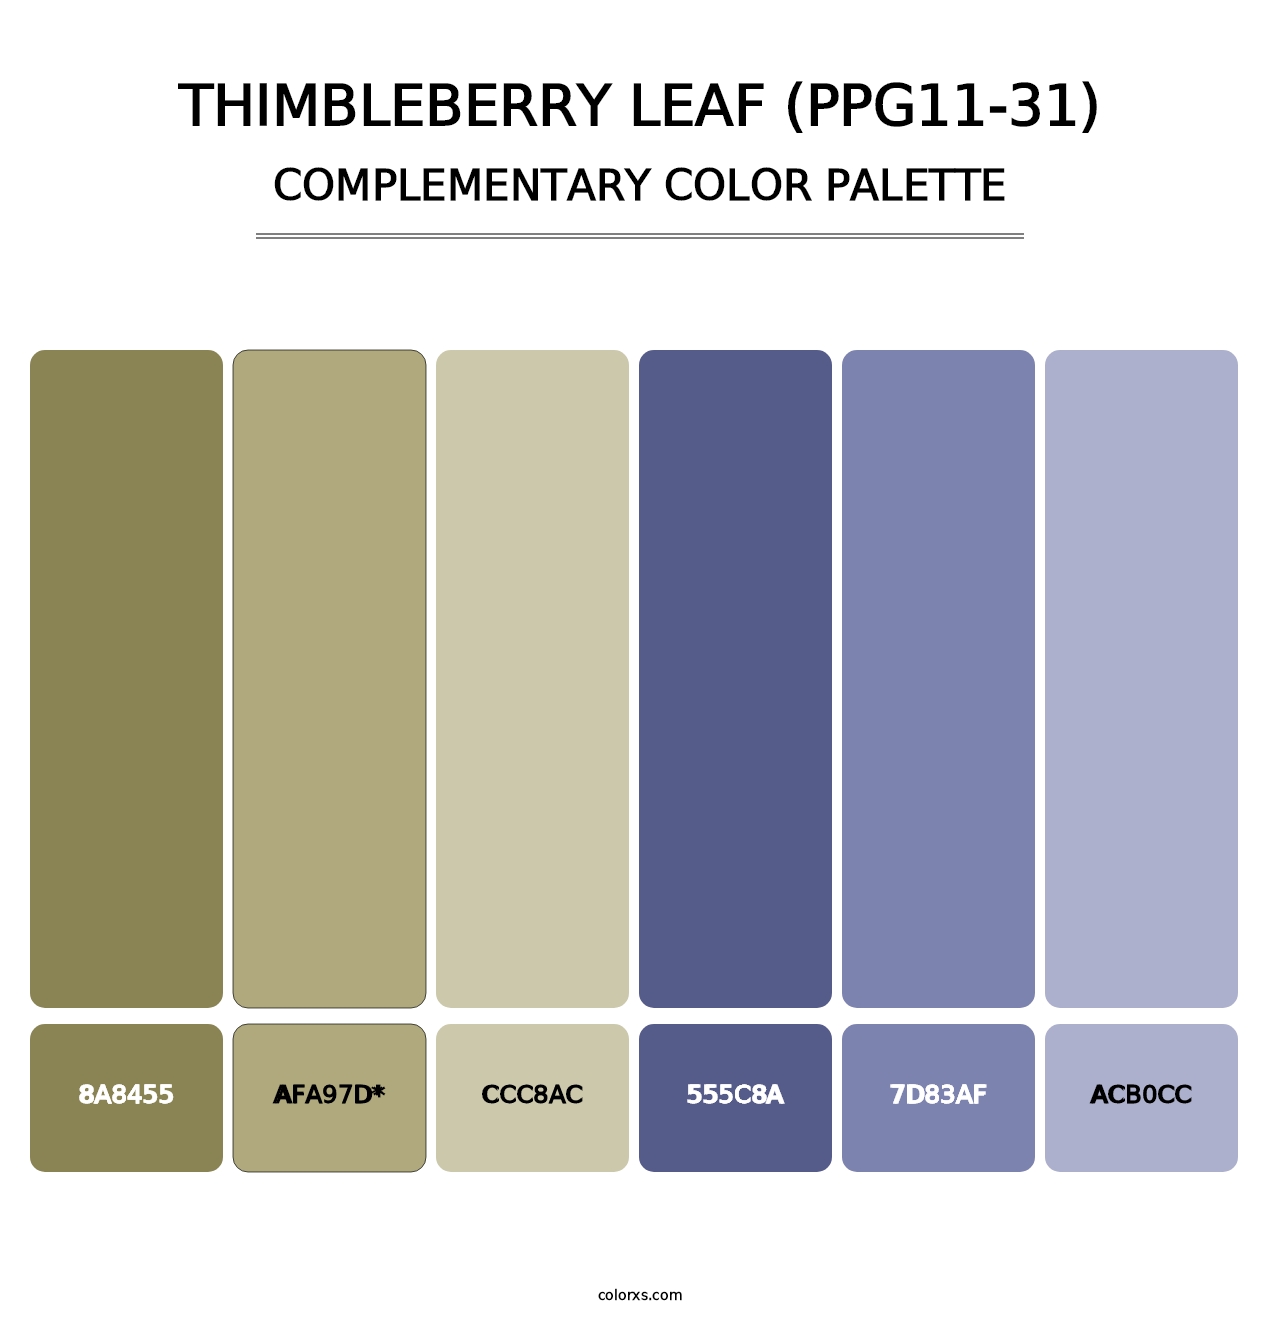 Thimbleberry Leaf (PPG11-31) - Complementary Color Palette